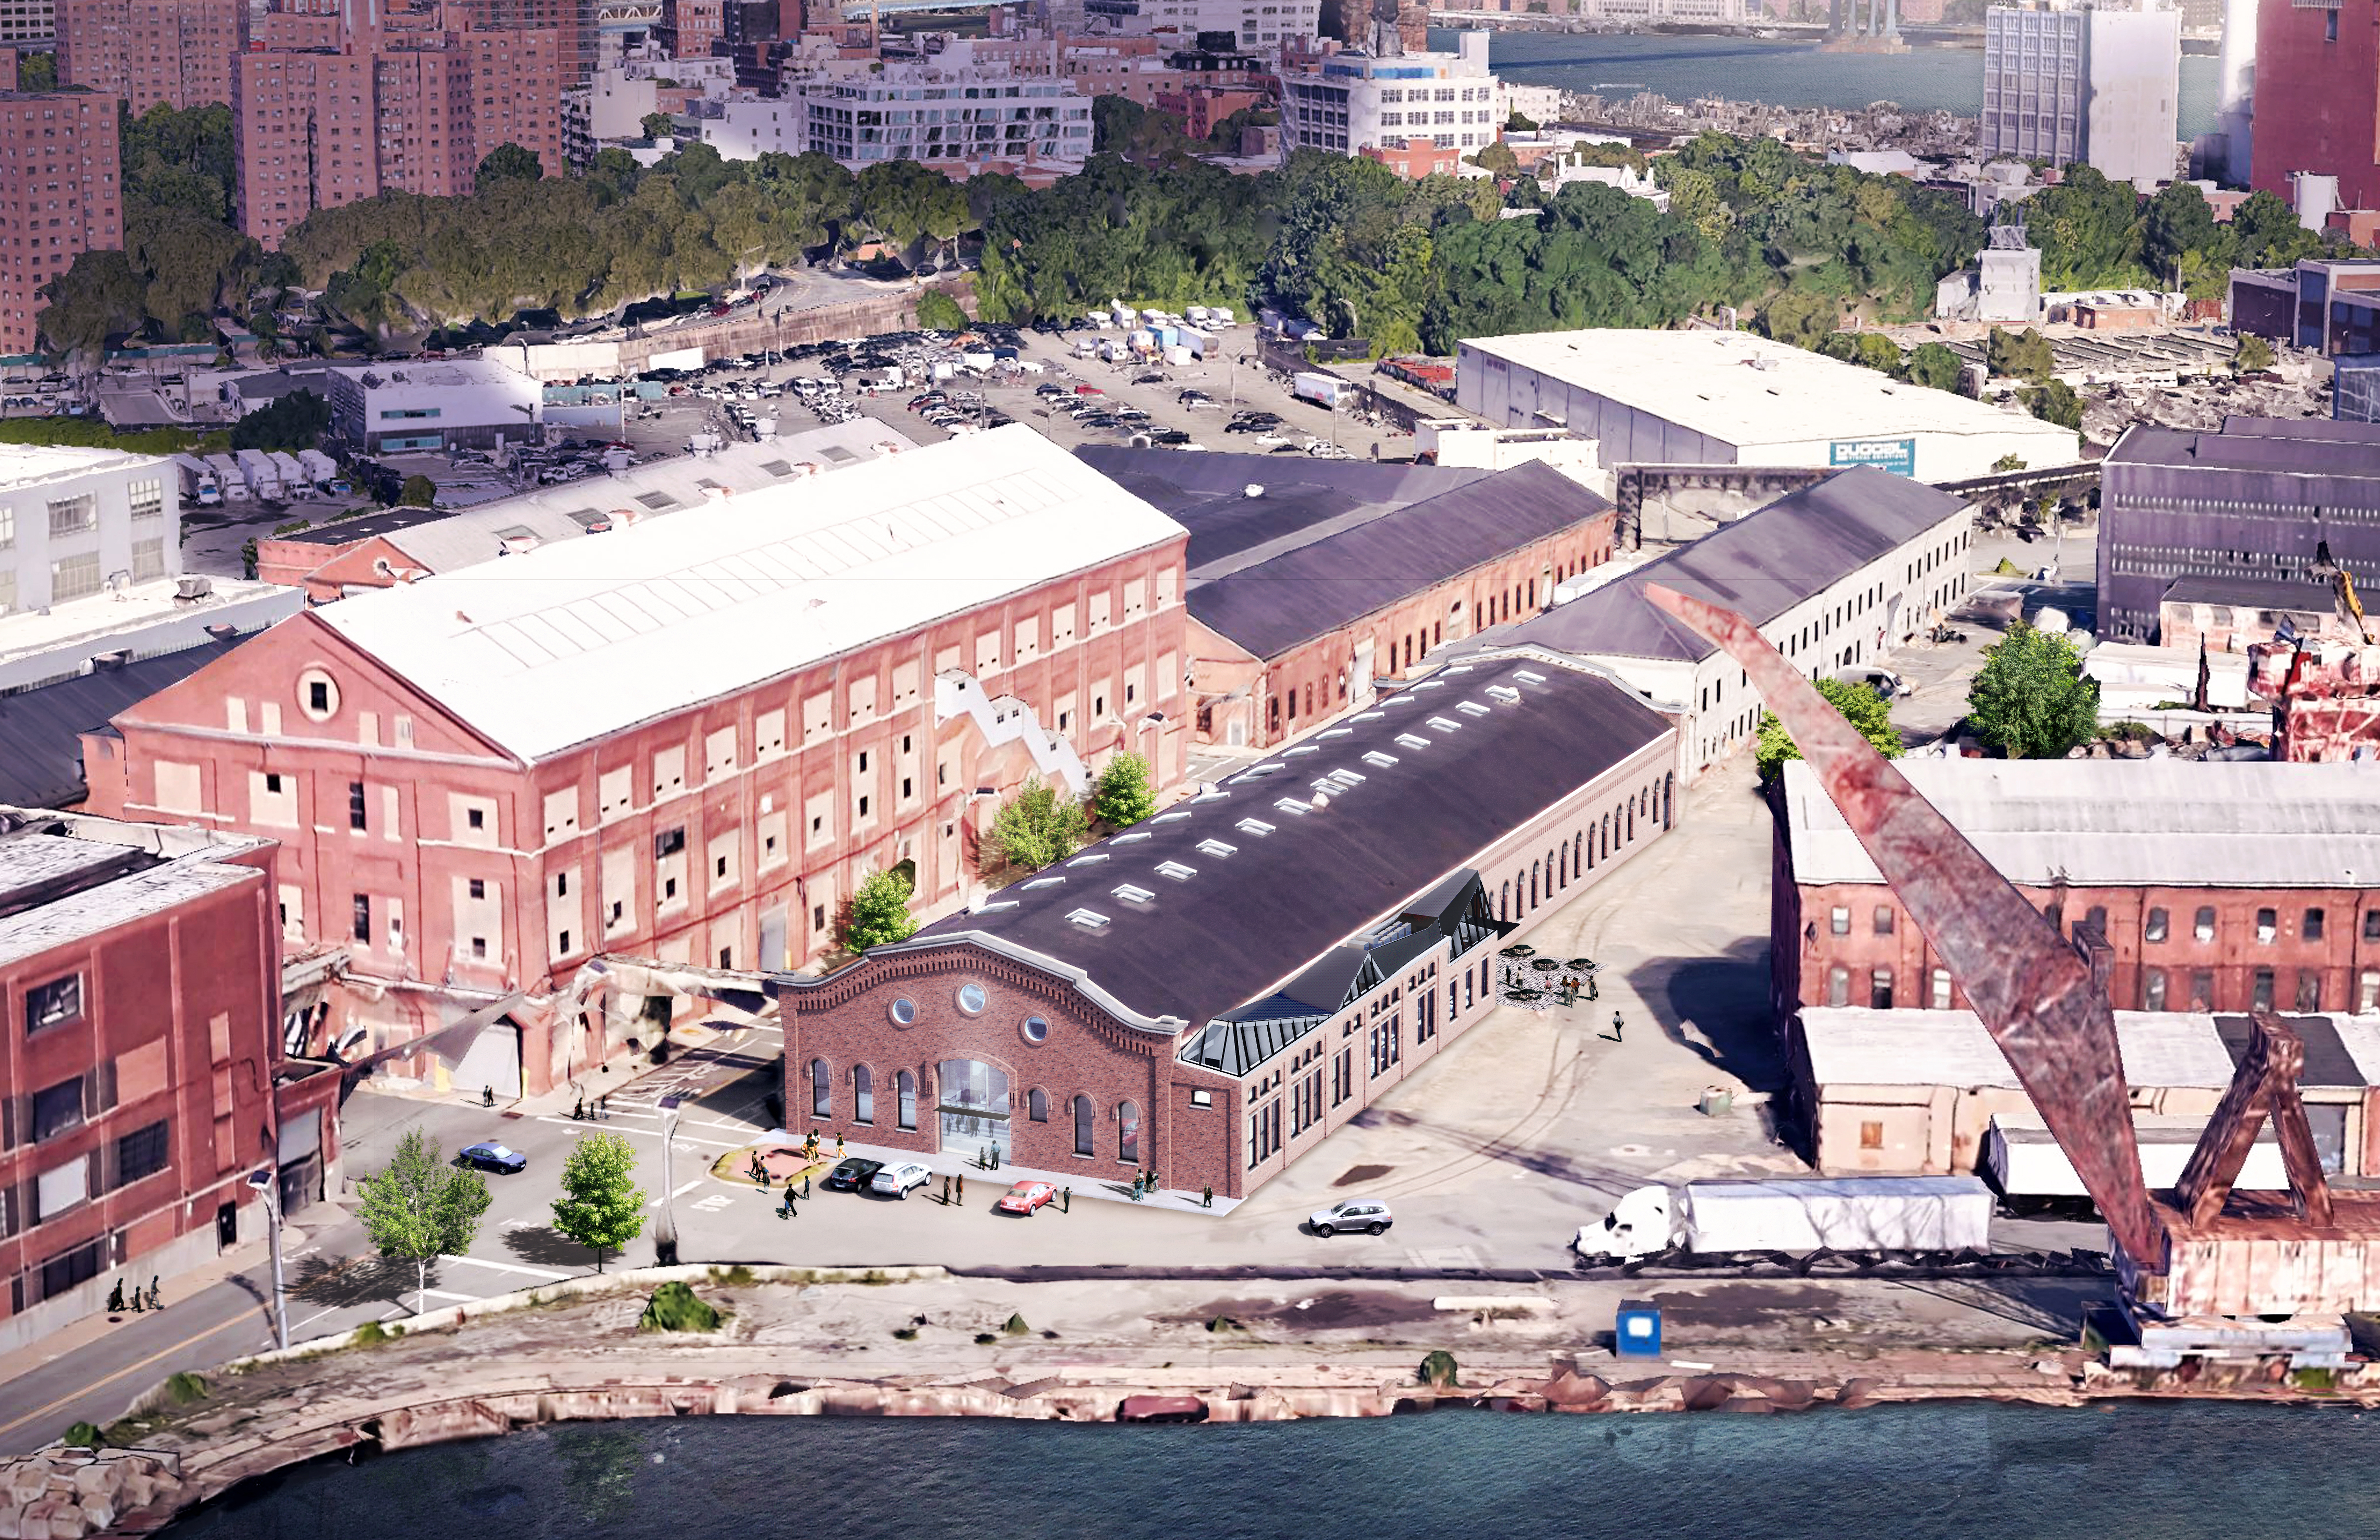 This conceptual rendering shows a proposed design for the Brooklyn Navy Yard's Building 20, the building with the dark gray roof. Renderings by Rogers Partners Architects + Urban Designers